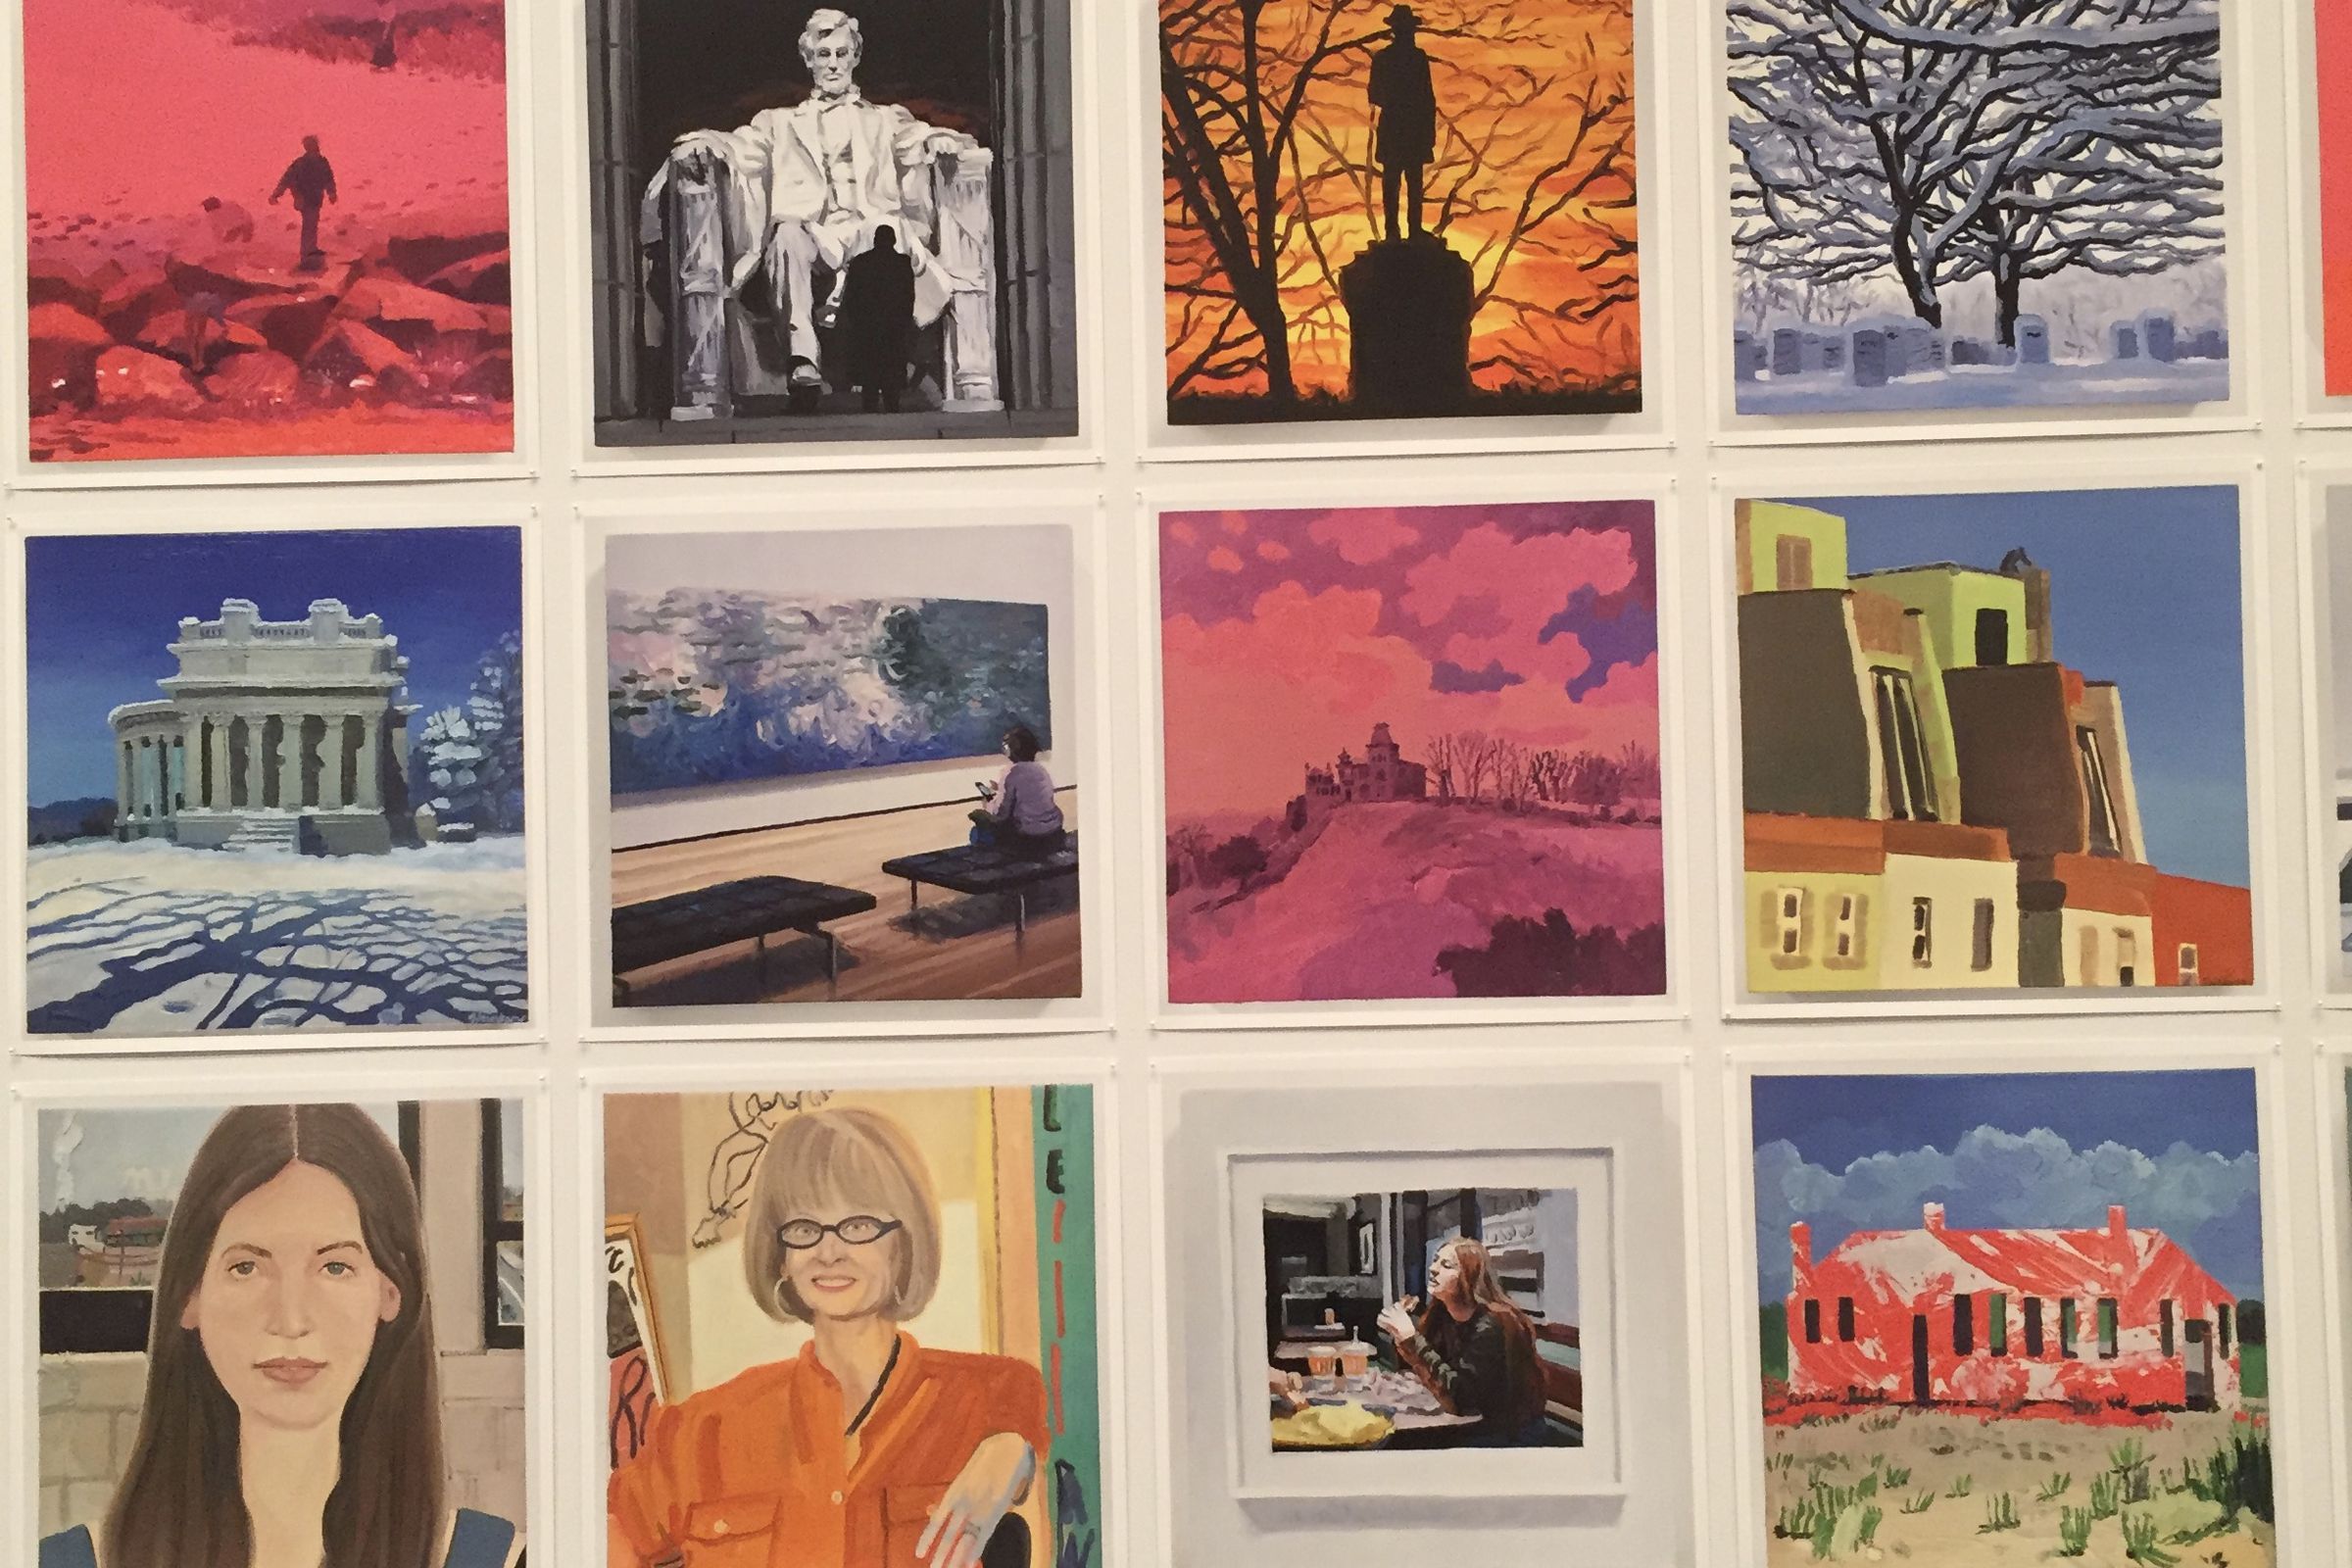 A series of paintings artists Cynthia Daignault and Daniel Heidkamp sent one another throughout their five-month exchange.